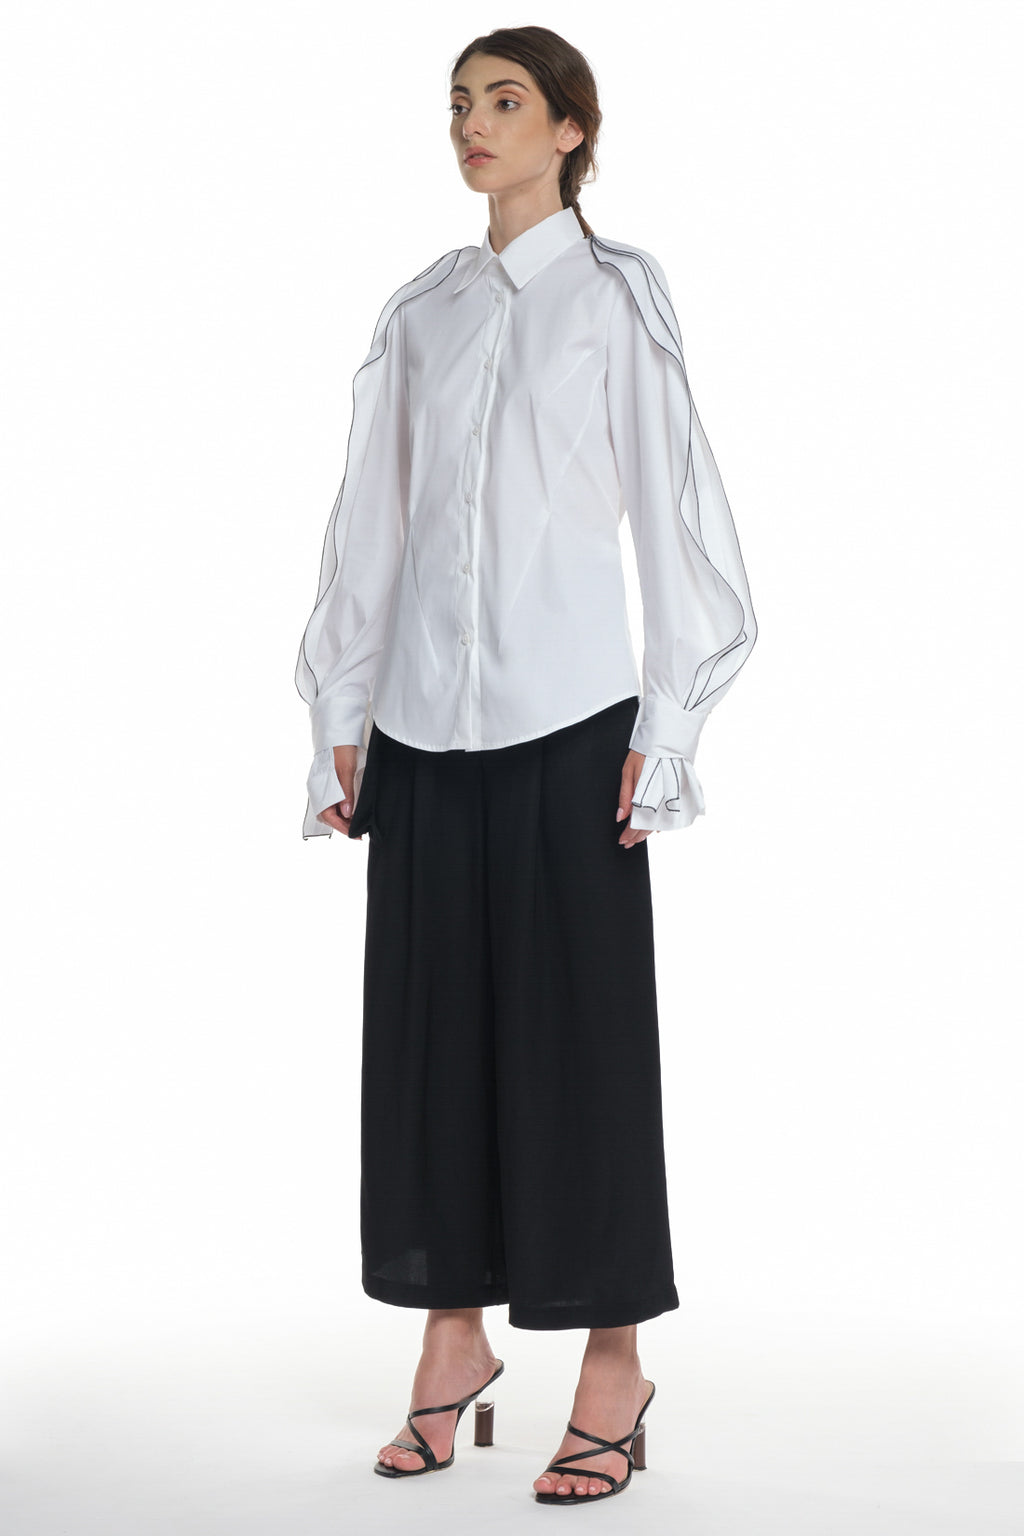 LONG SLEEVE SHIRT WITH BUTTONING ON THE FRONT, HIGH COLLAR, RUFFLED LAYERS ON THE SLEEVES